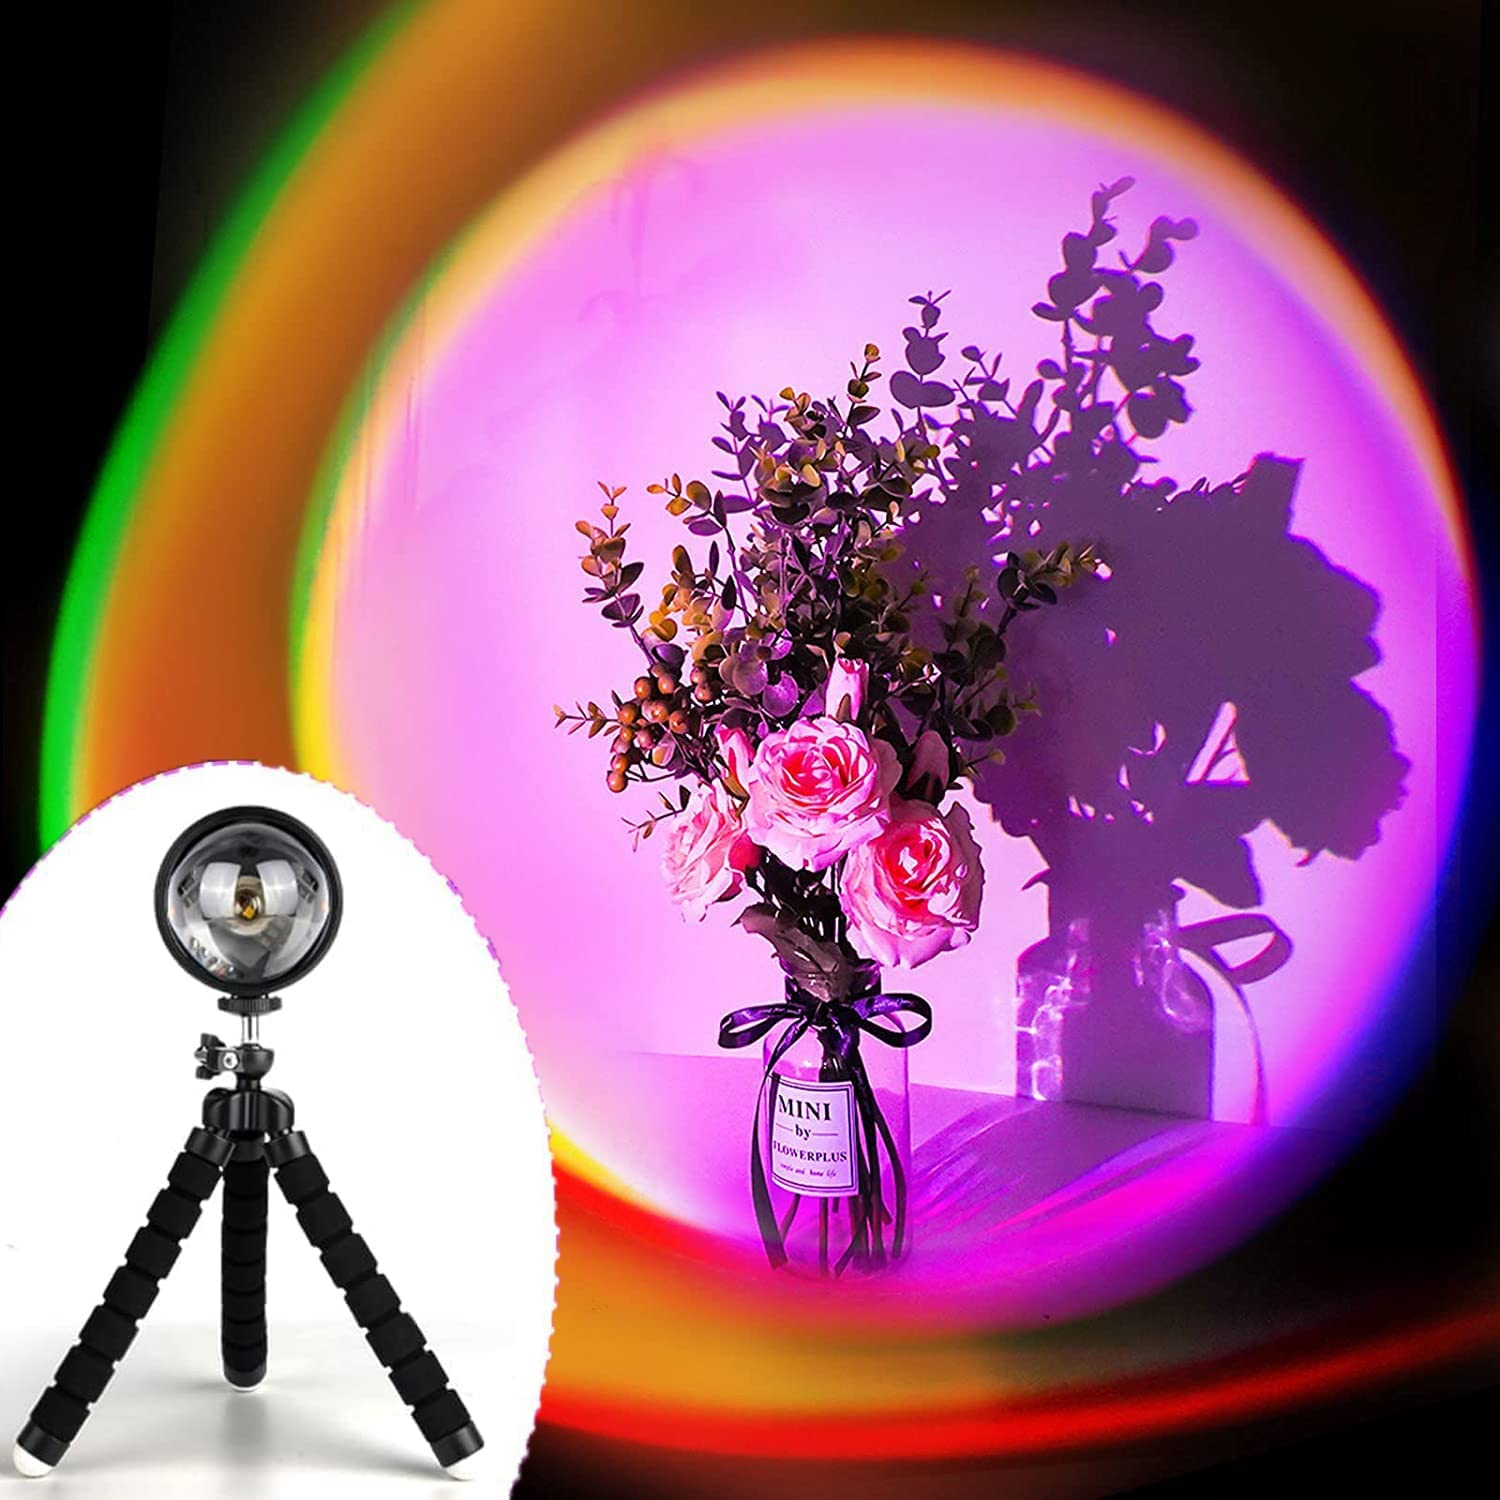 Smart LED Sunset Projection Lamp, Multi-Color, 360 Degree Rotation